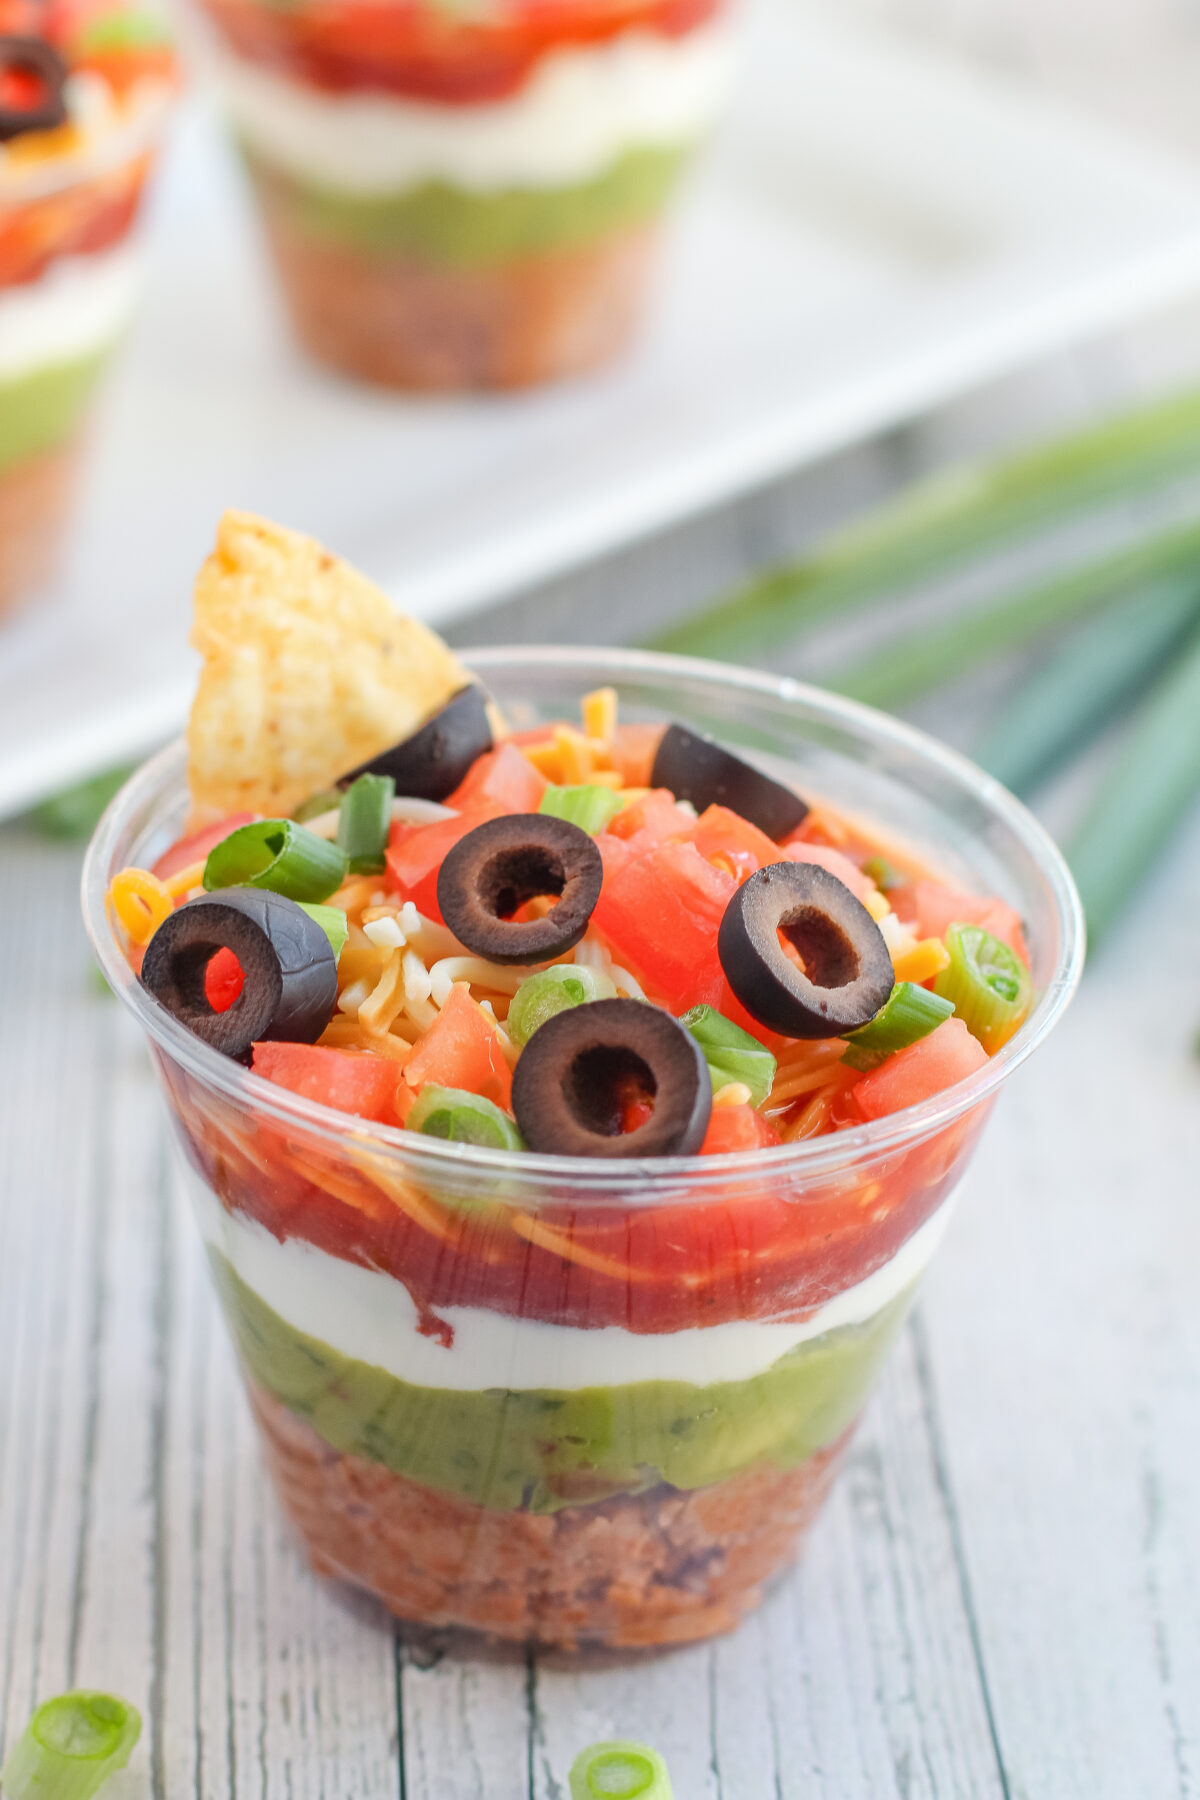 Looking for an easy individual appetizer recipe? Try out our 7 layer dip cups! Simple and delicious, it's sure to be a hit at any party!